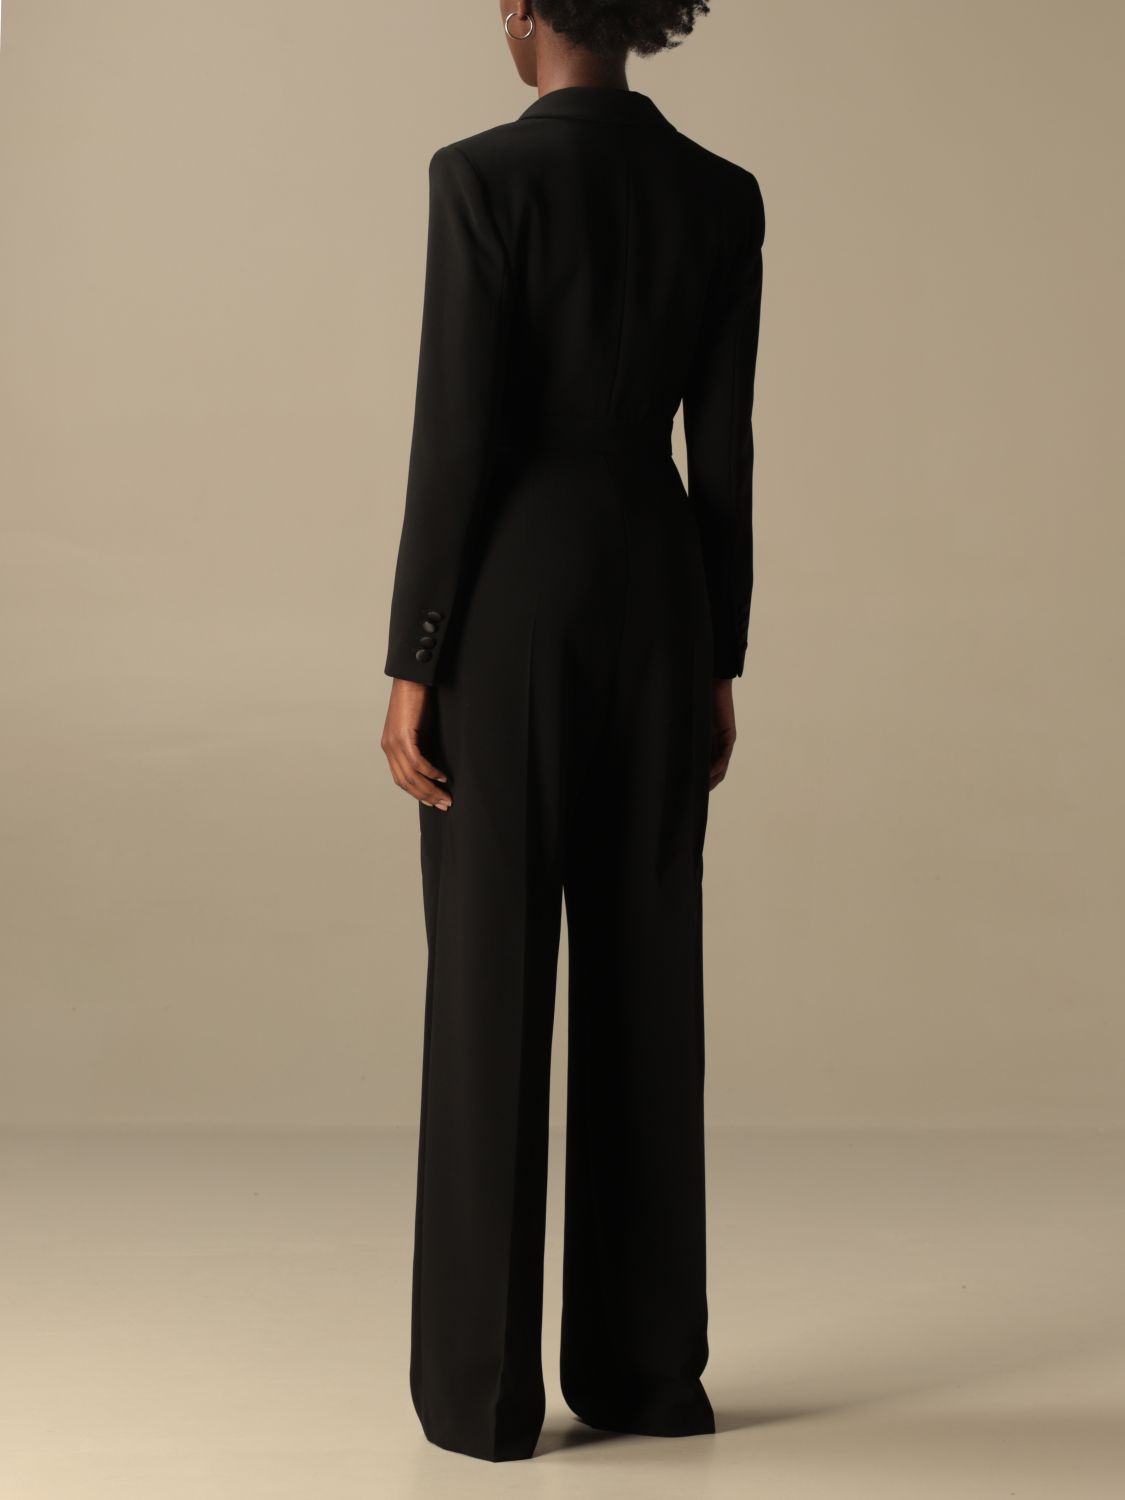 Max Mara Outlet: Gommoso jumpsuit with satin lapel and fringed belt